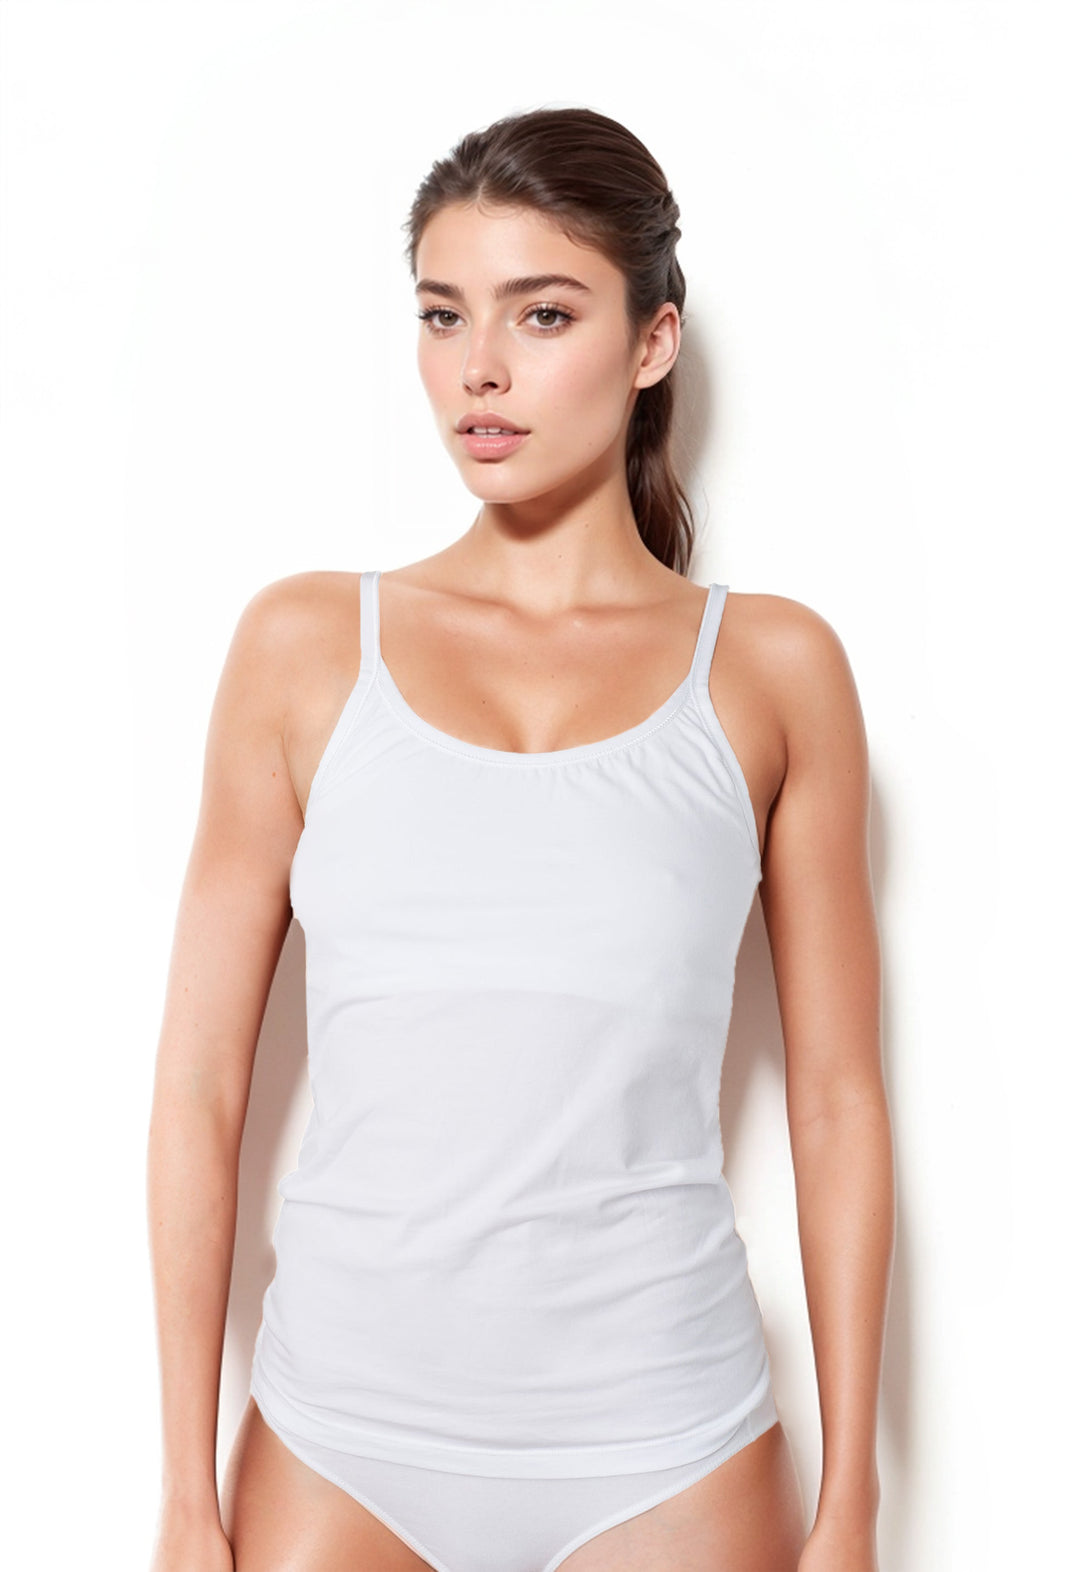 Woman's Cotton Thin Strapped Camisole with Built-in Shelf Bra - Elita Intimates